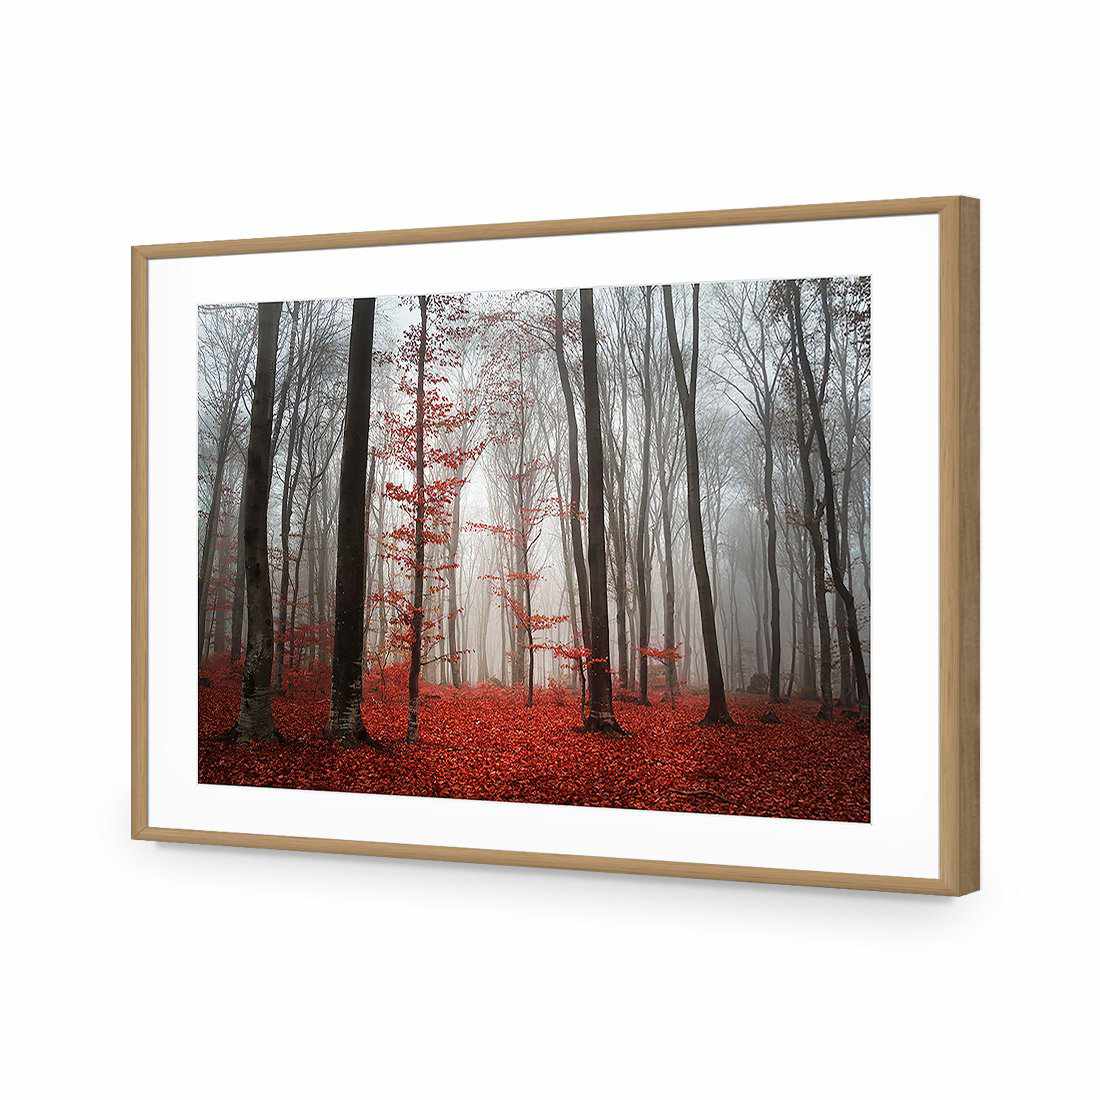 Scarlet Forest-Acrylic-Wall Art Design-With Border-Acrylic - Oak Frame-45x30cm-Wall Art Designs